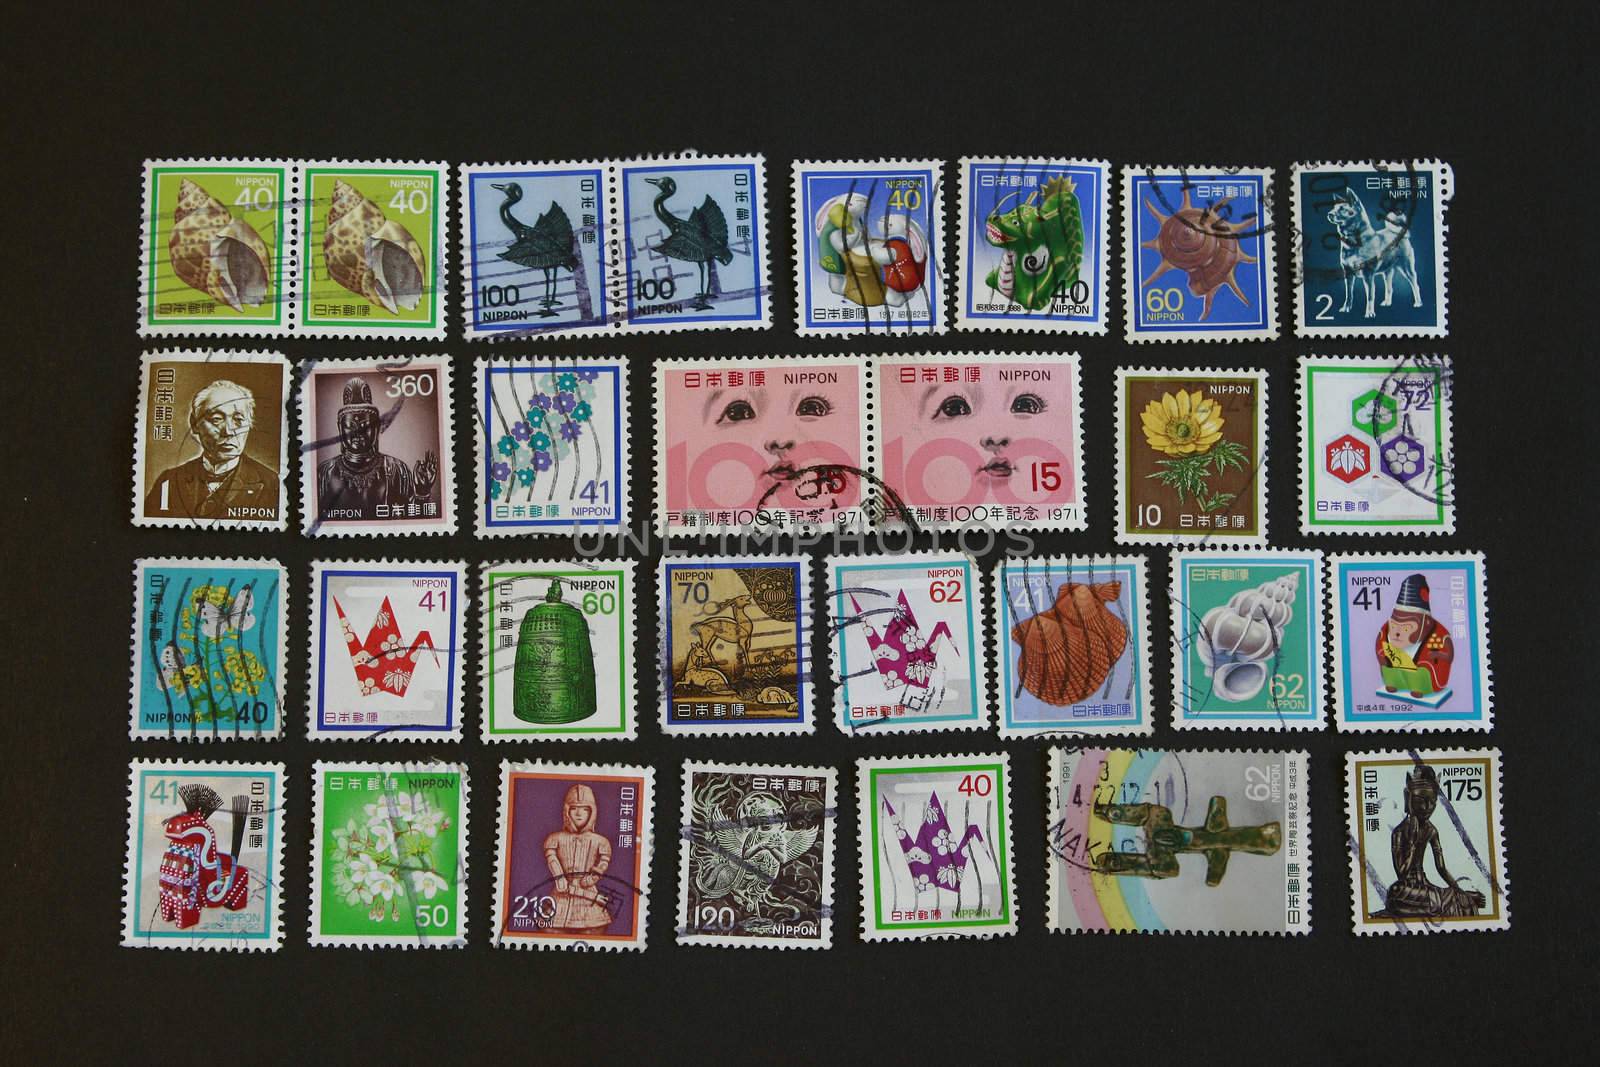 Japanese Vintage old Stamps rare collectibles series